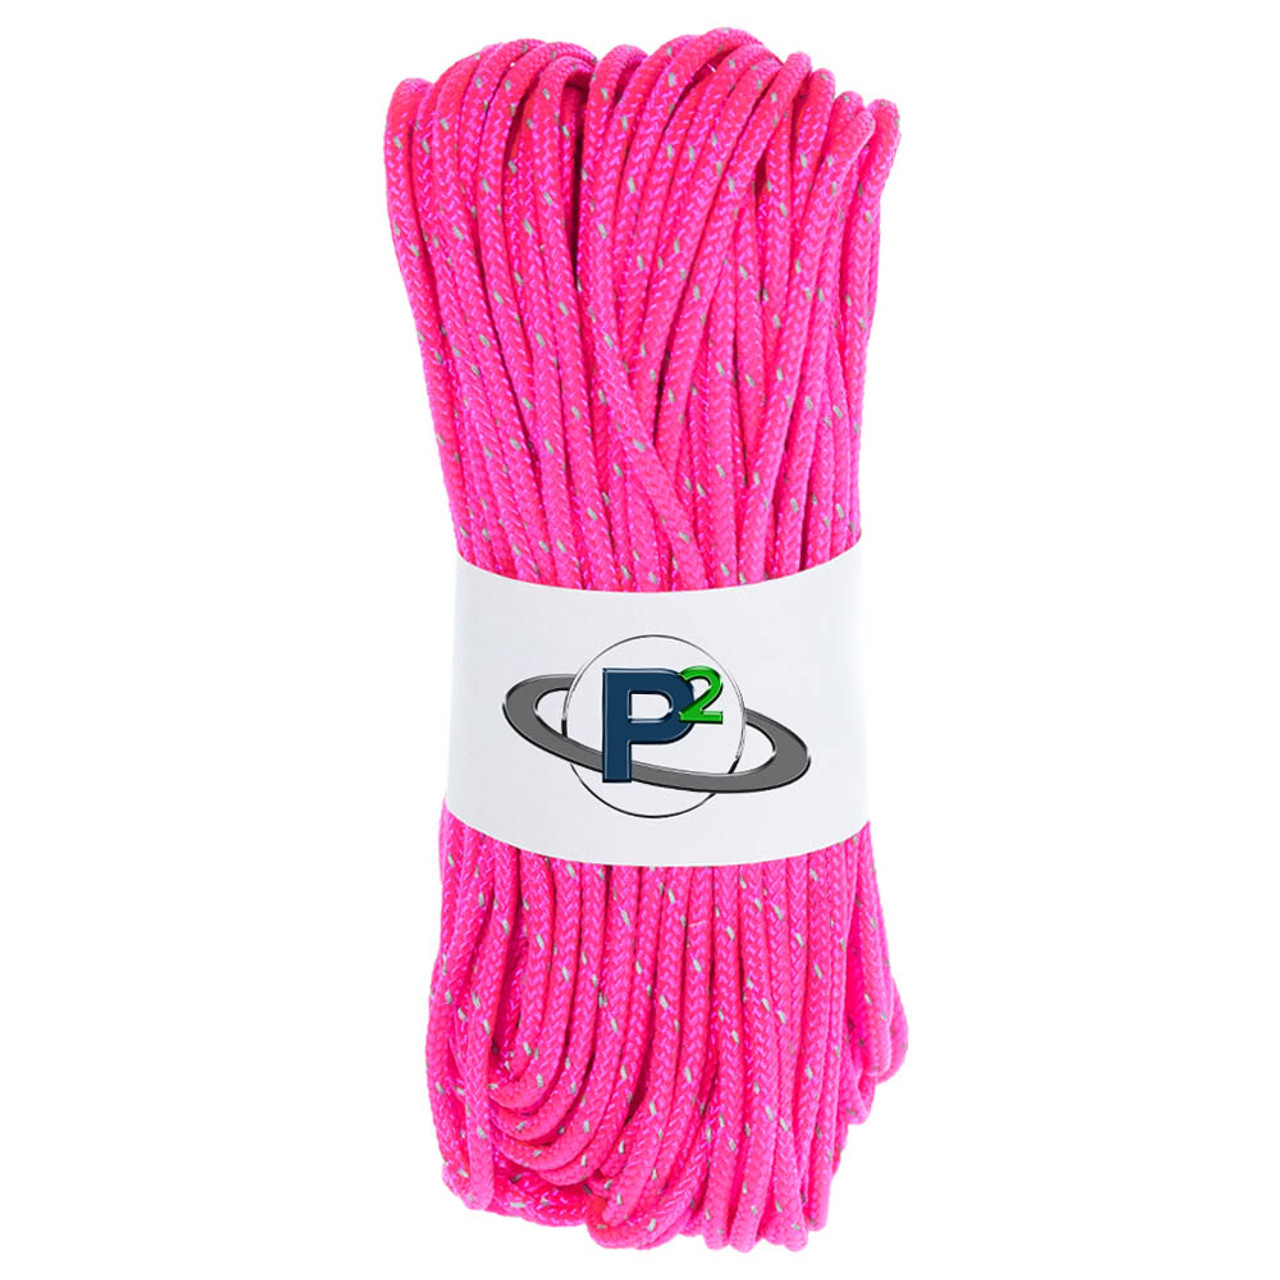 Neon Pink - Reflective 95 Paracord - Spools